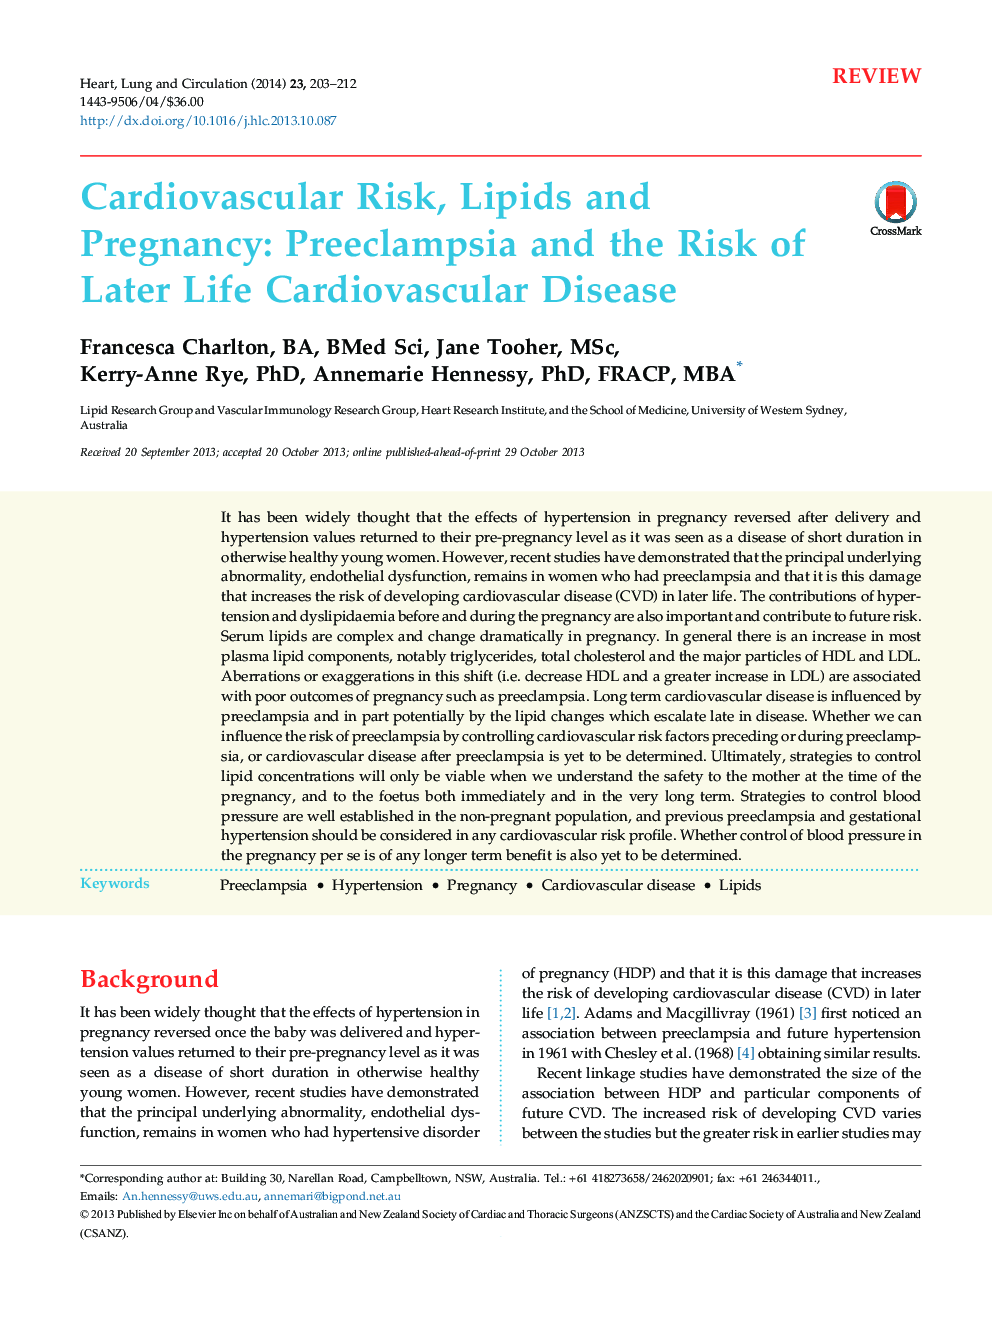 Cardiovascular Risk, Lipids and Pregnancy: Preeclampsia and the Risk of Later Life Cardiovascular Disease